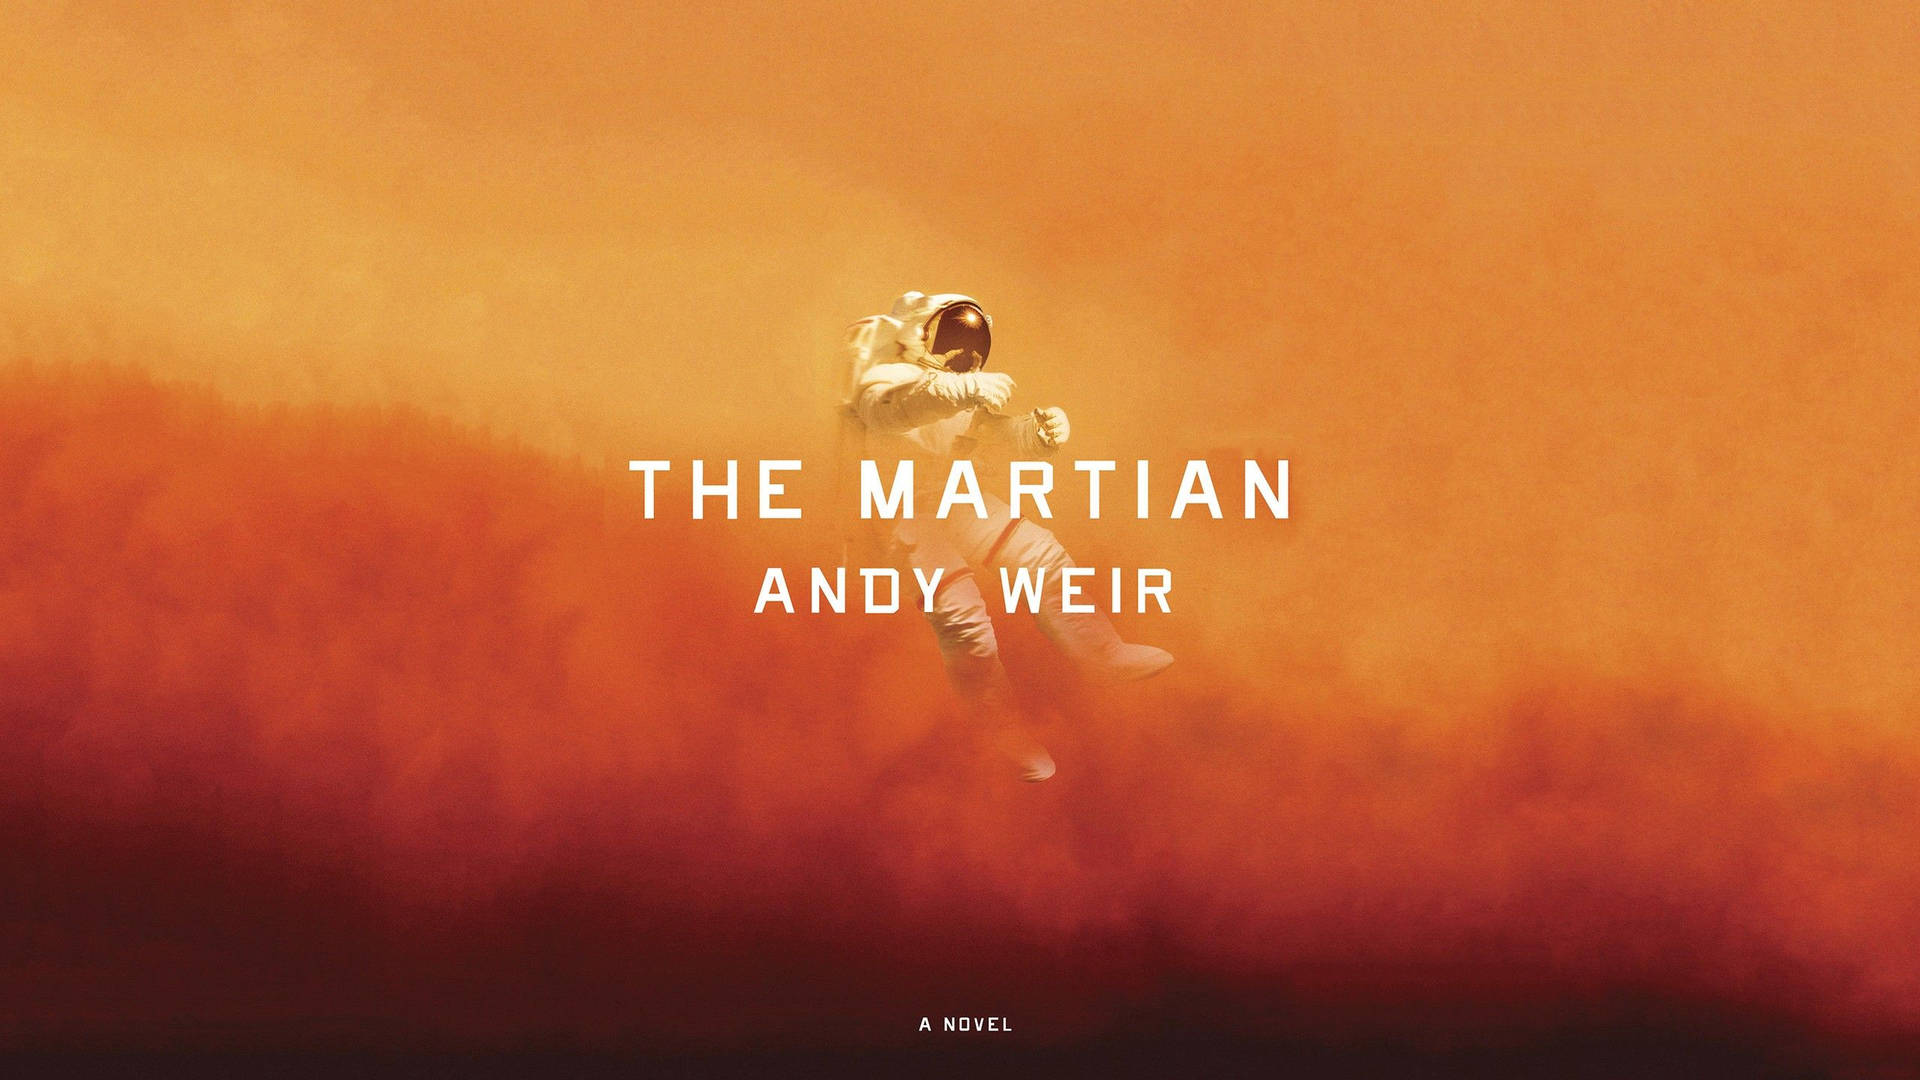 The Martian Andy Weir Book Cover Wallpaper